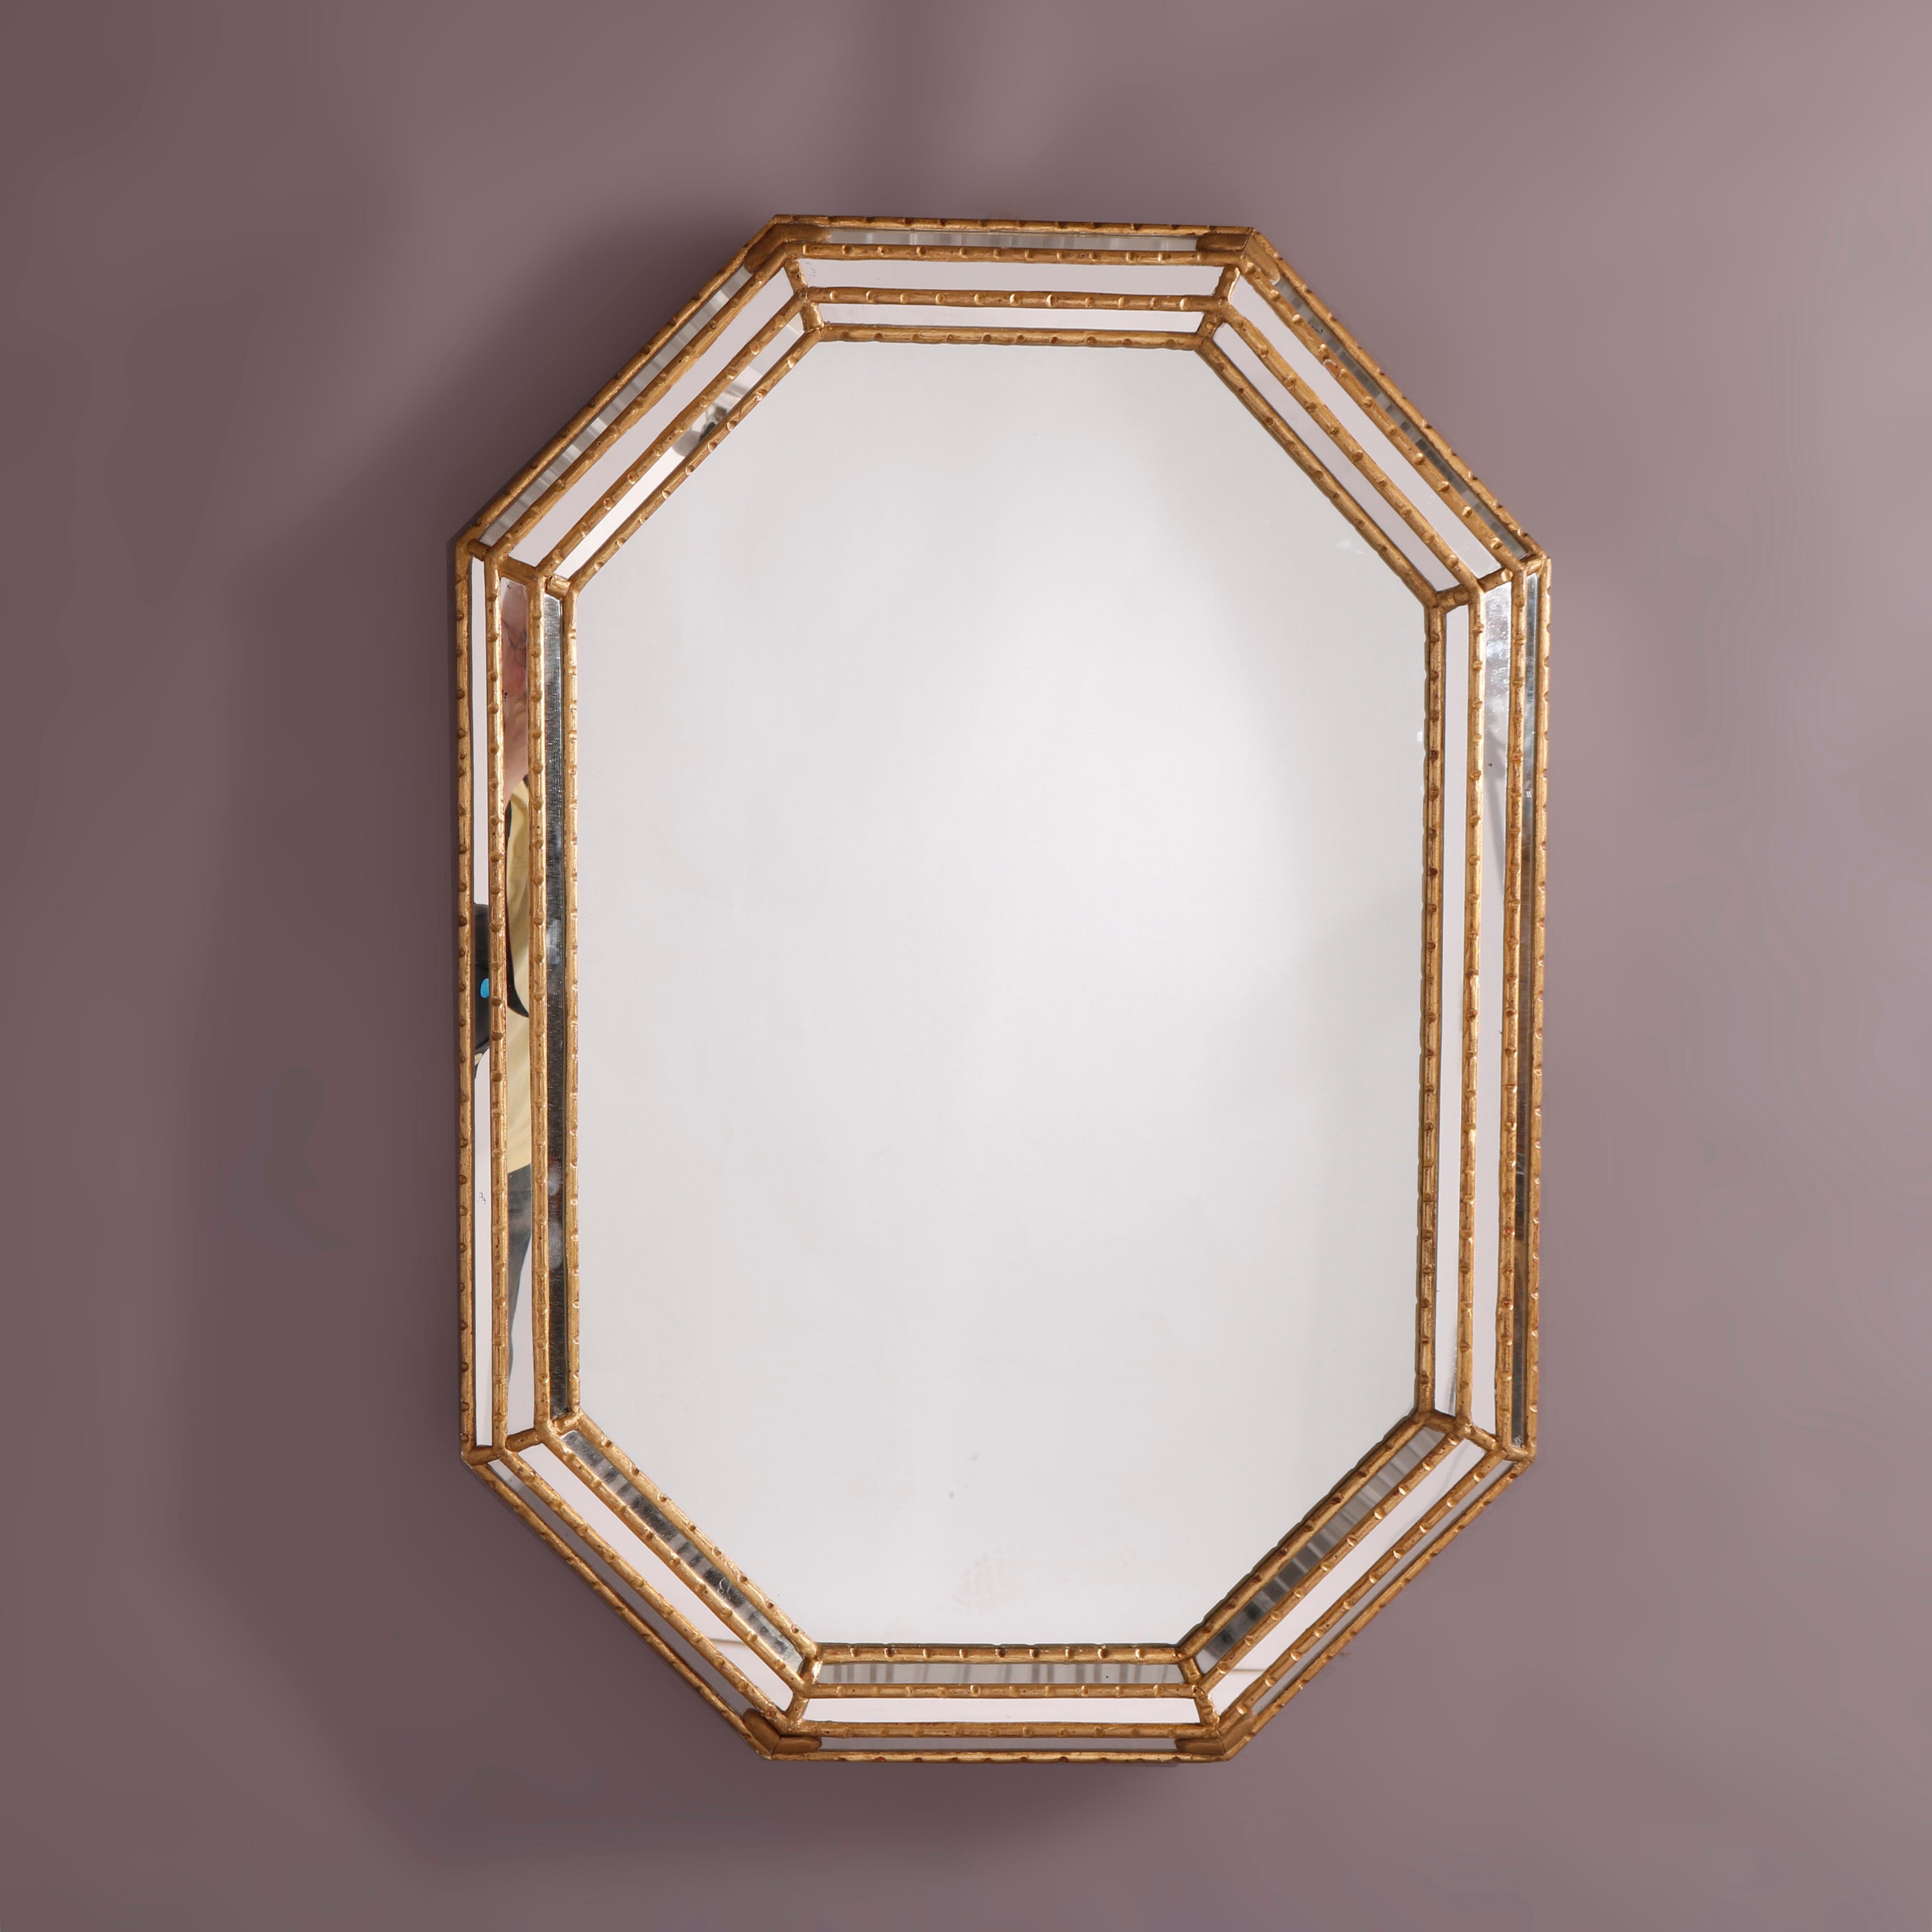 Octagonal Giltwood Parclose Wall Mirror, 20th Century For Sale 5